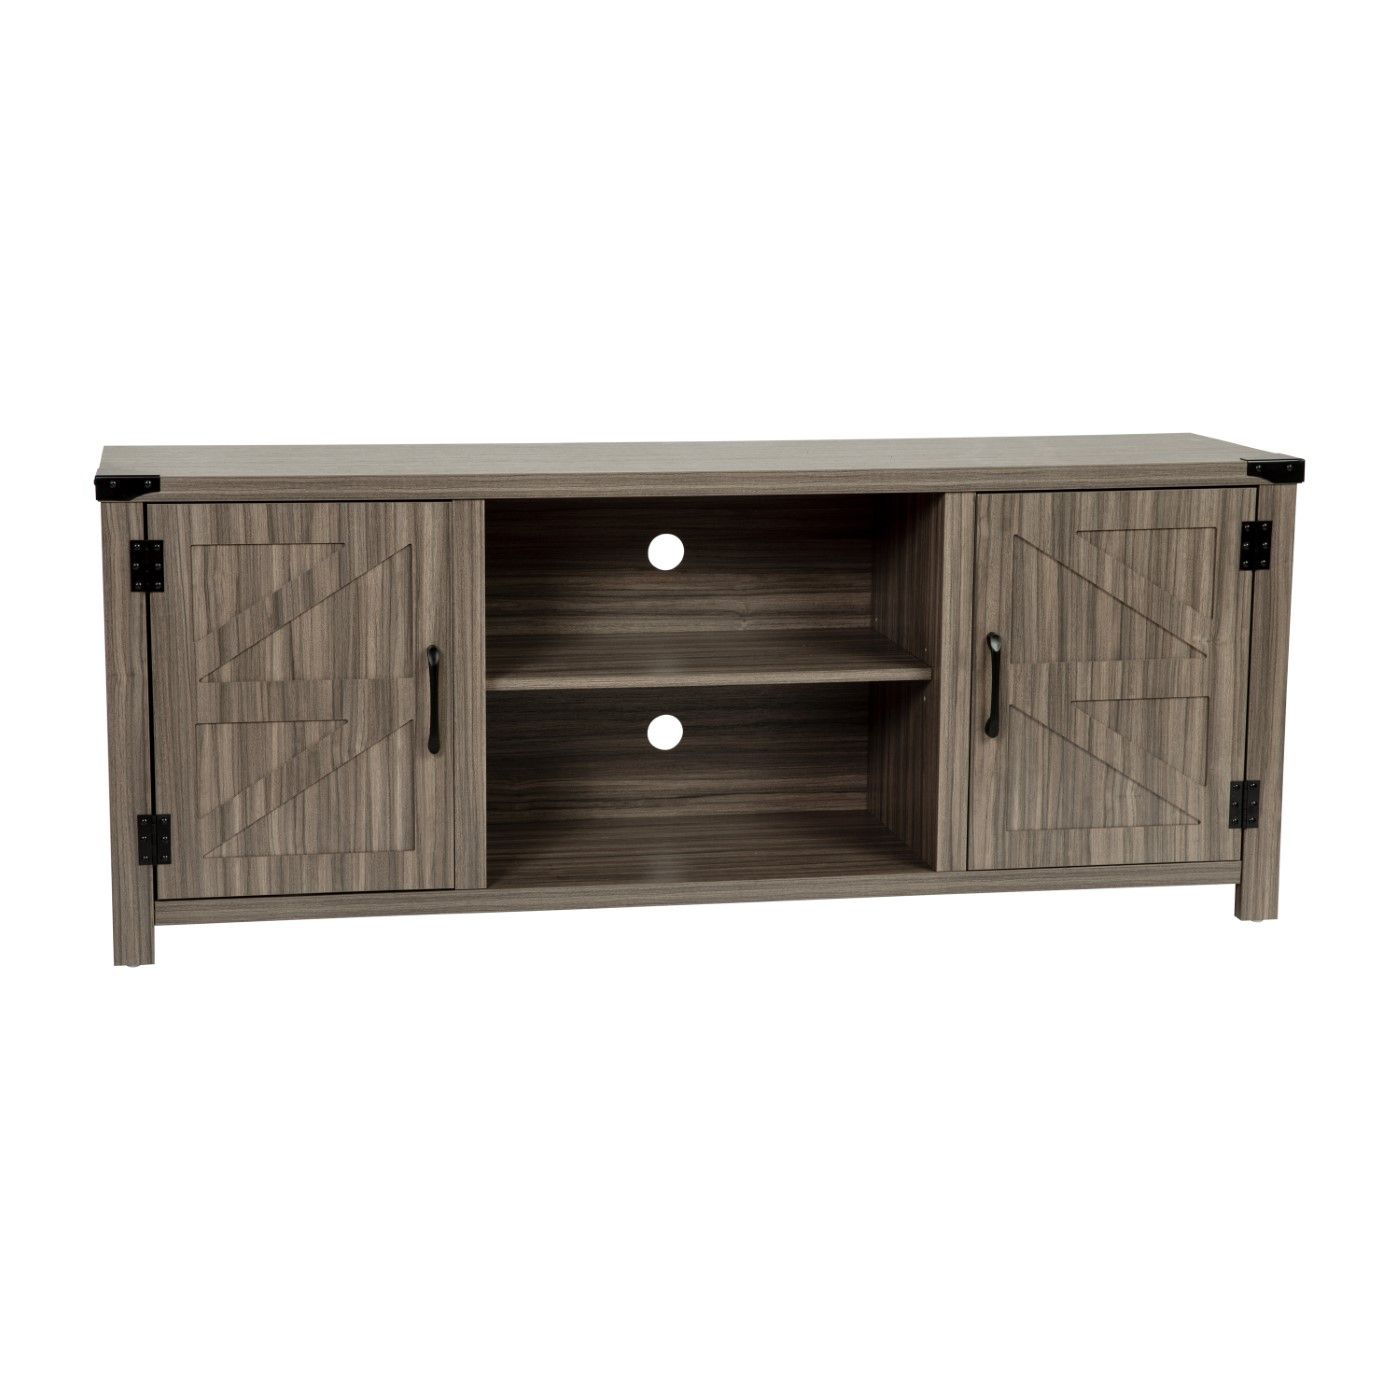 Ayrith Modern Farmhouse Barn Door Tv Stand – Gray Wash Oak For Tv'S Up To  65 Inches – 59" Entertainment Center With Adjustable Shelf Within Modern Farmhouse Barn Tv Stands (Photo 7 of 15)